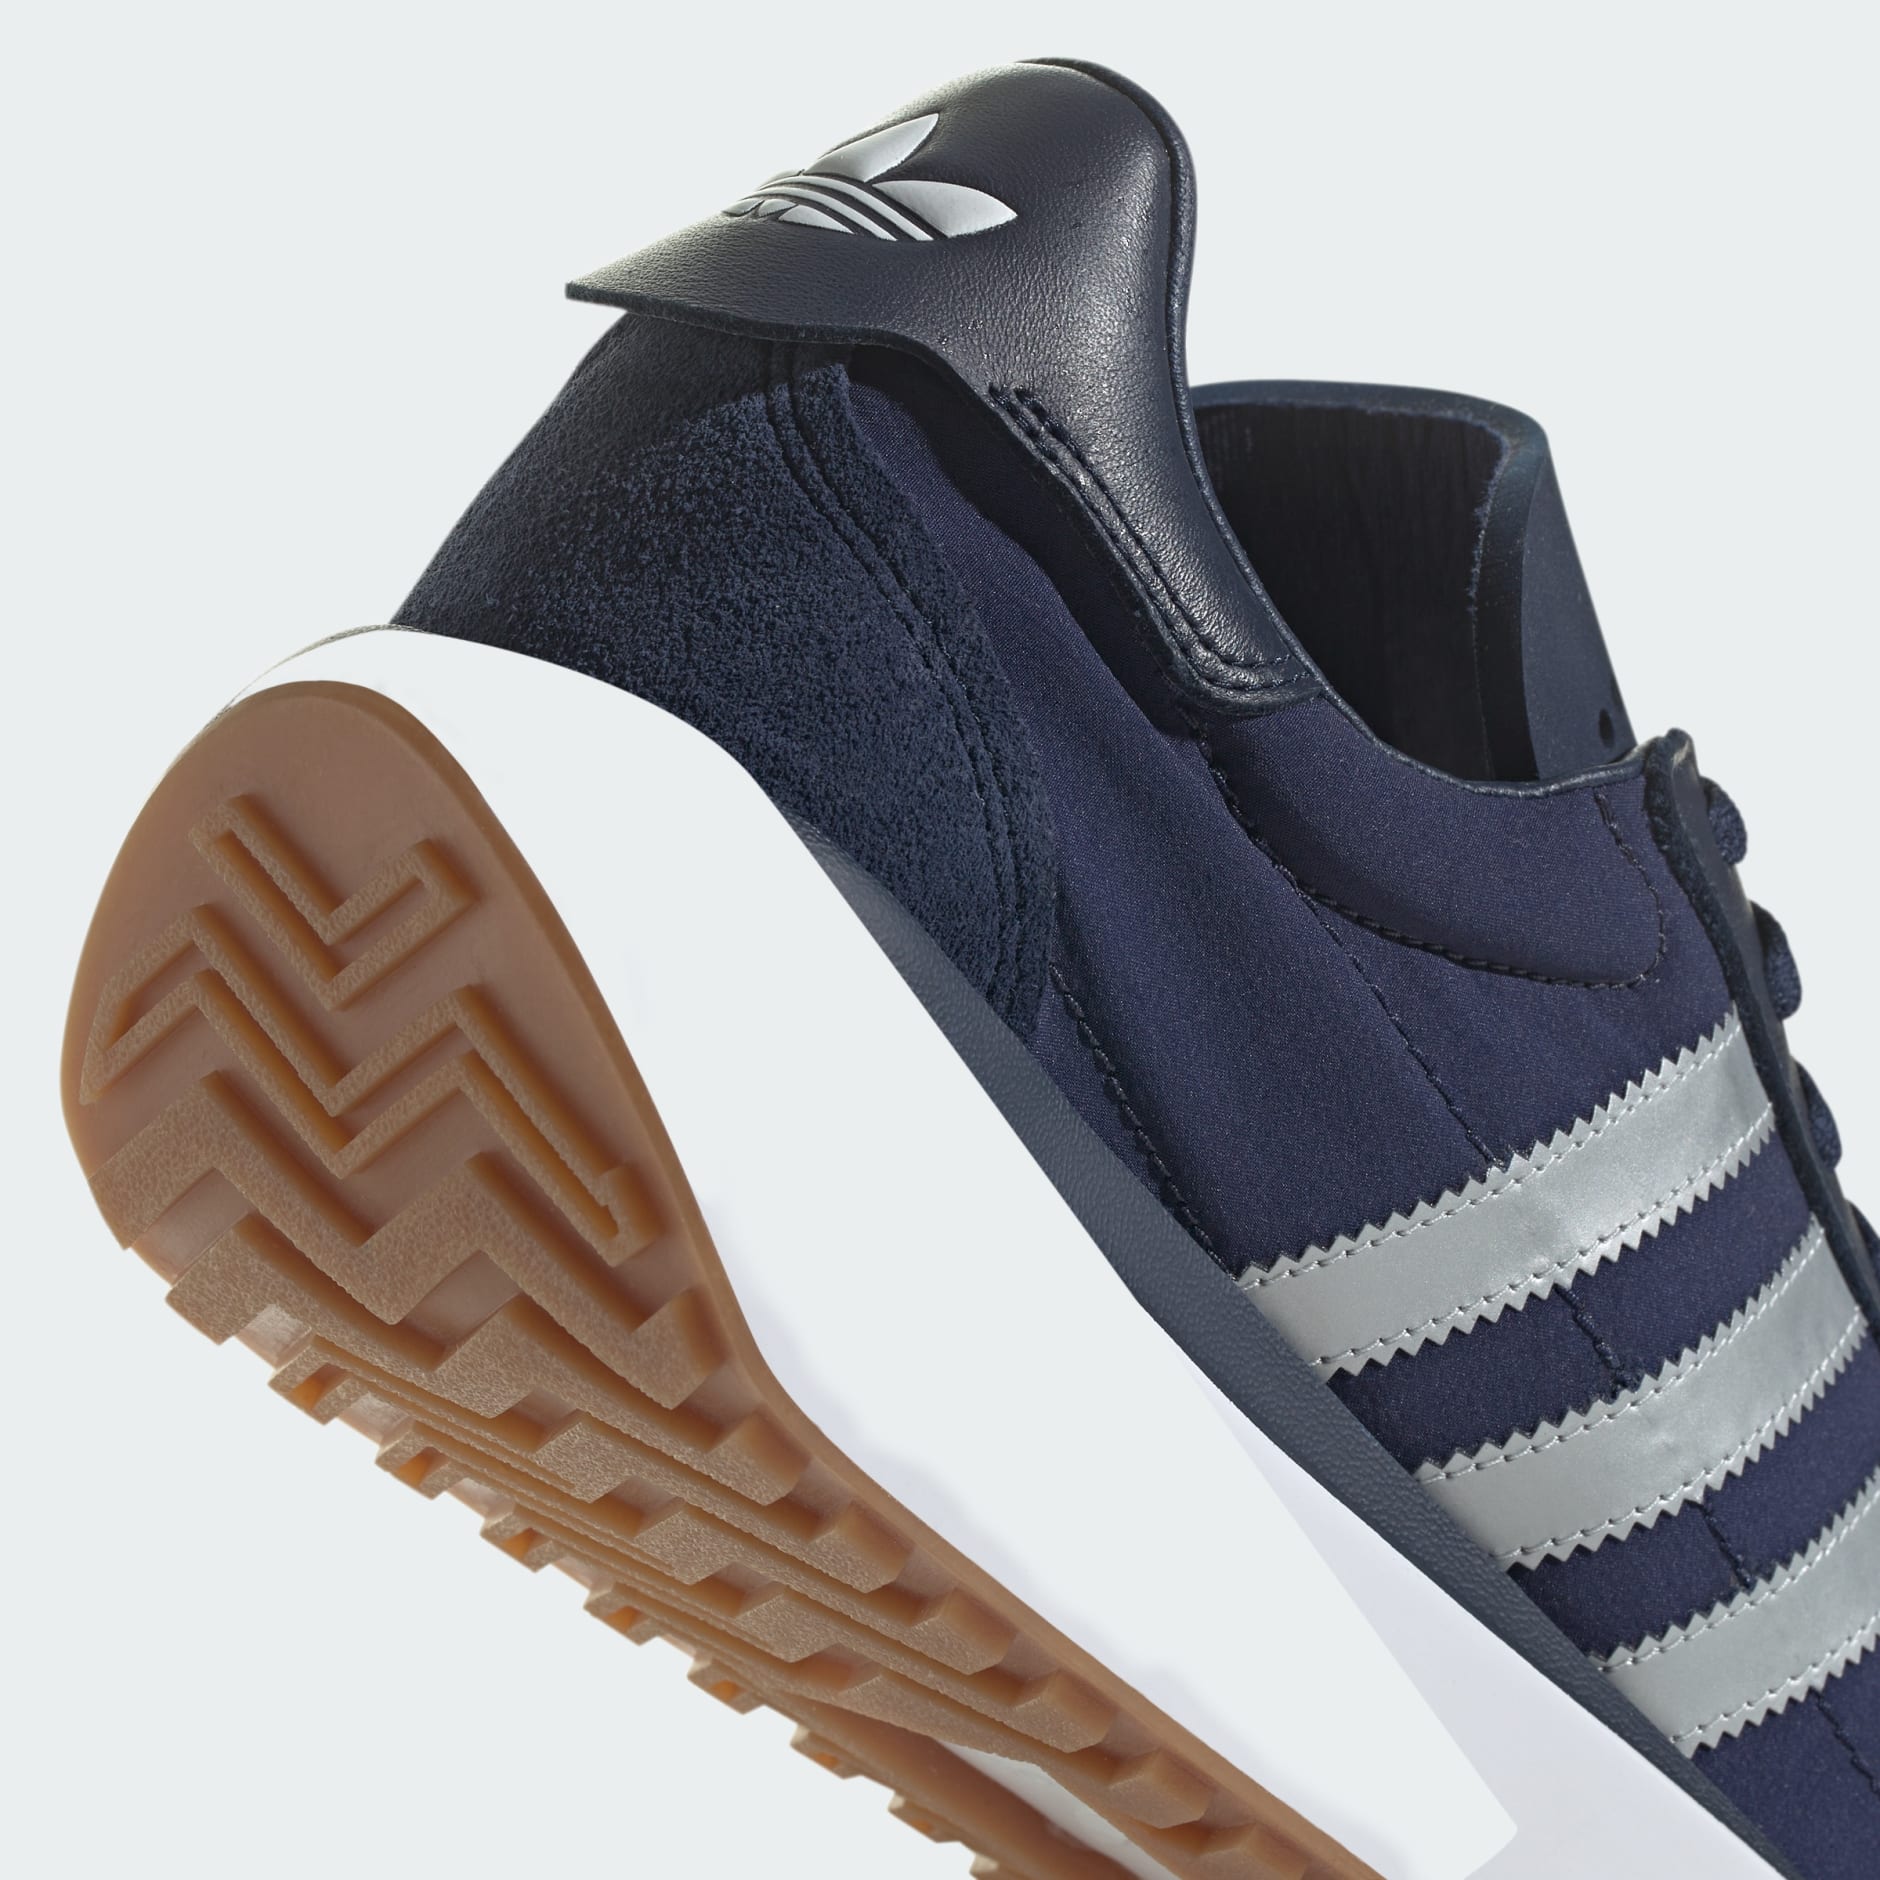 Men's Shoes - Country XLG Shoes - Blue | adidas Qatar